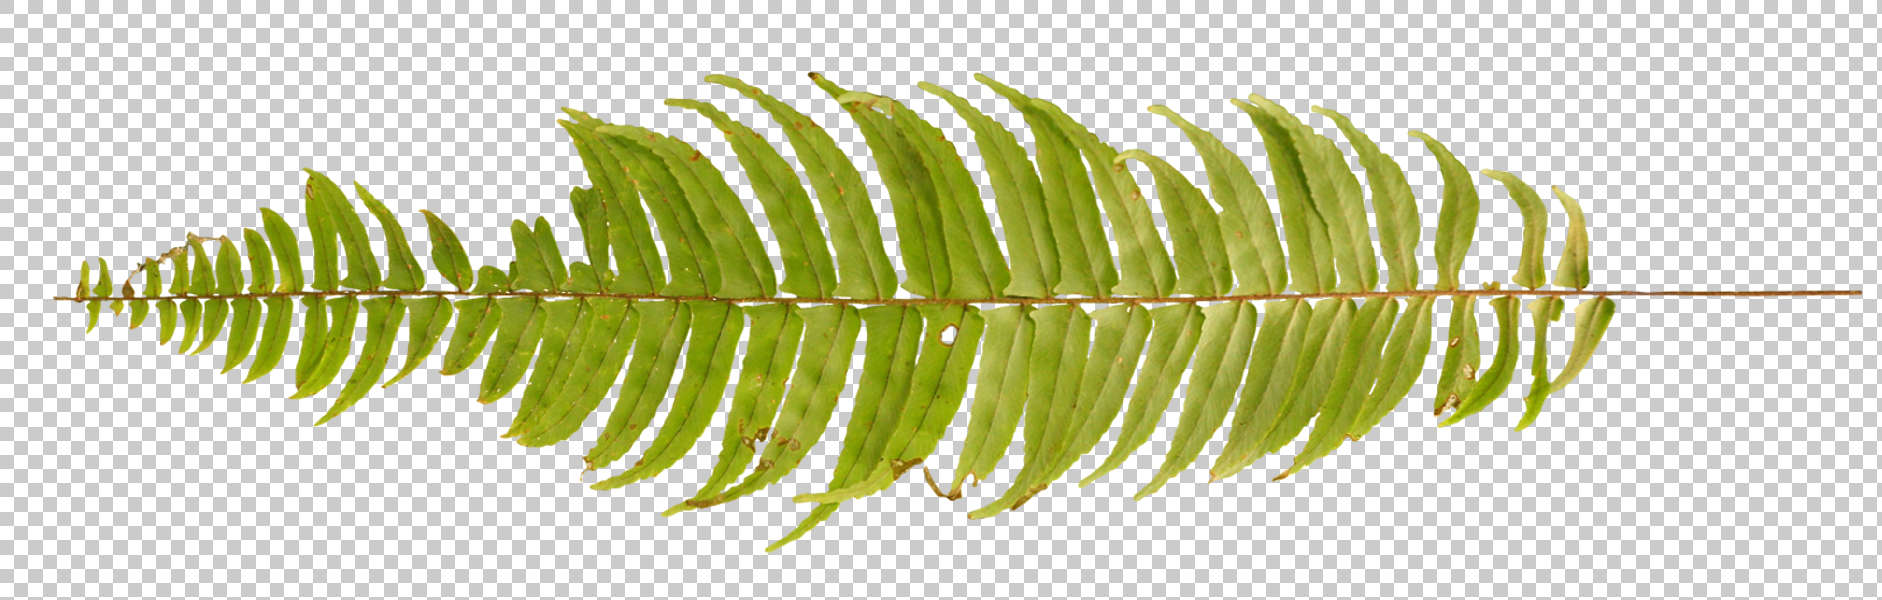 LeavesTropical0145 - Free Background Texture - fern plant leaf tropical